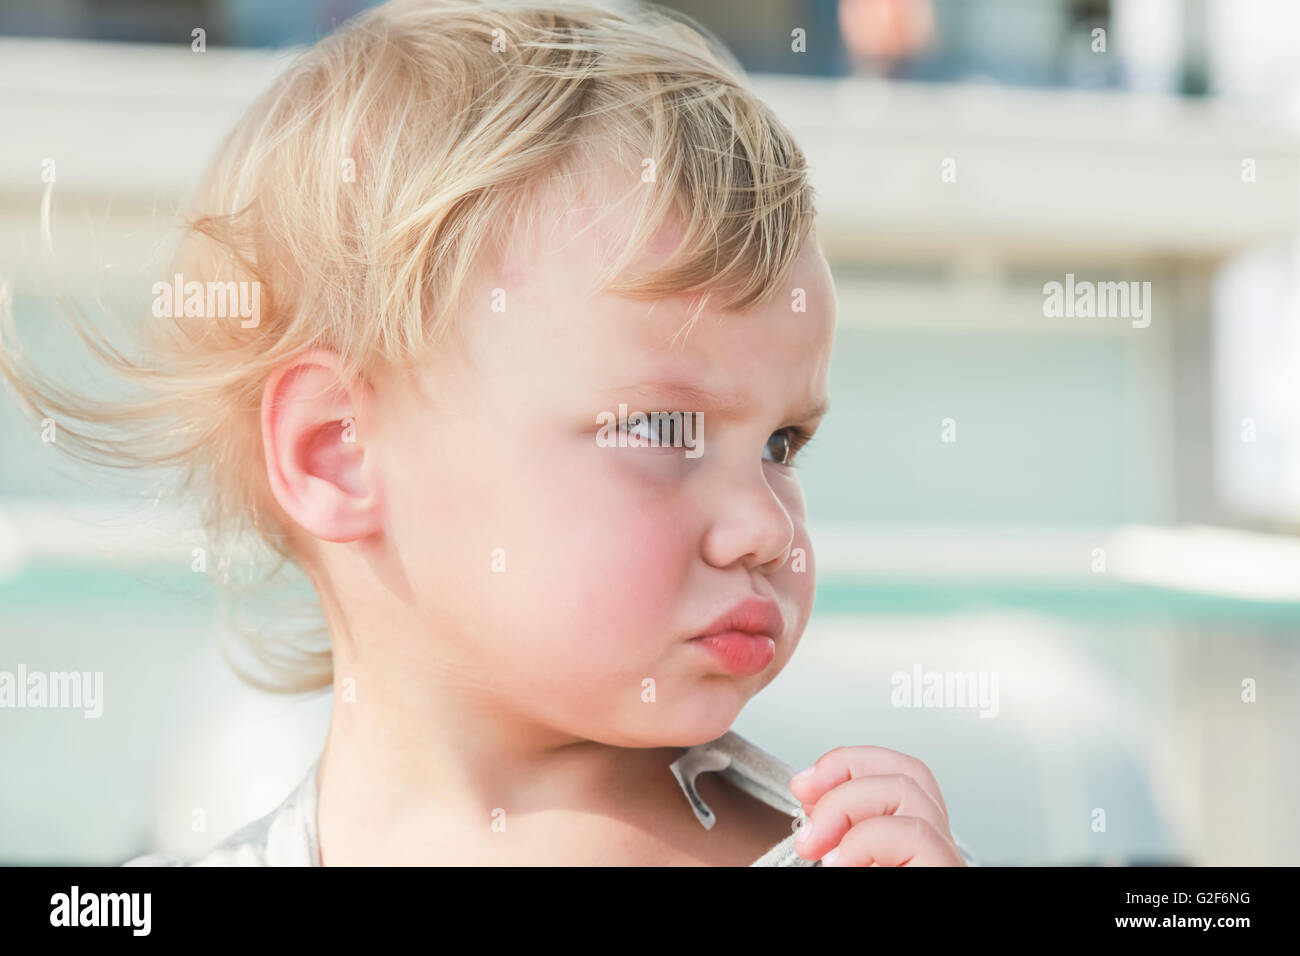 Outdoor close-up portrait of confused cute Caucasian blond baby girl Stock Photo